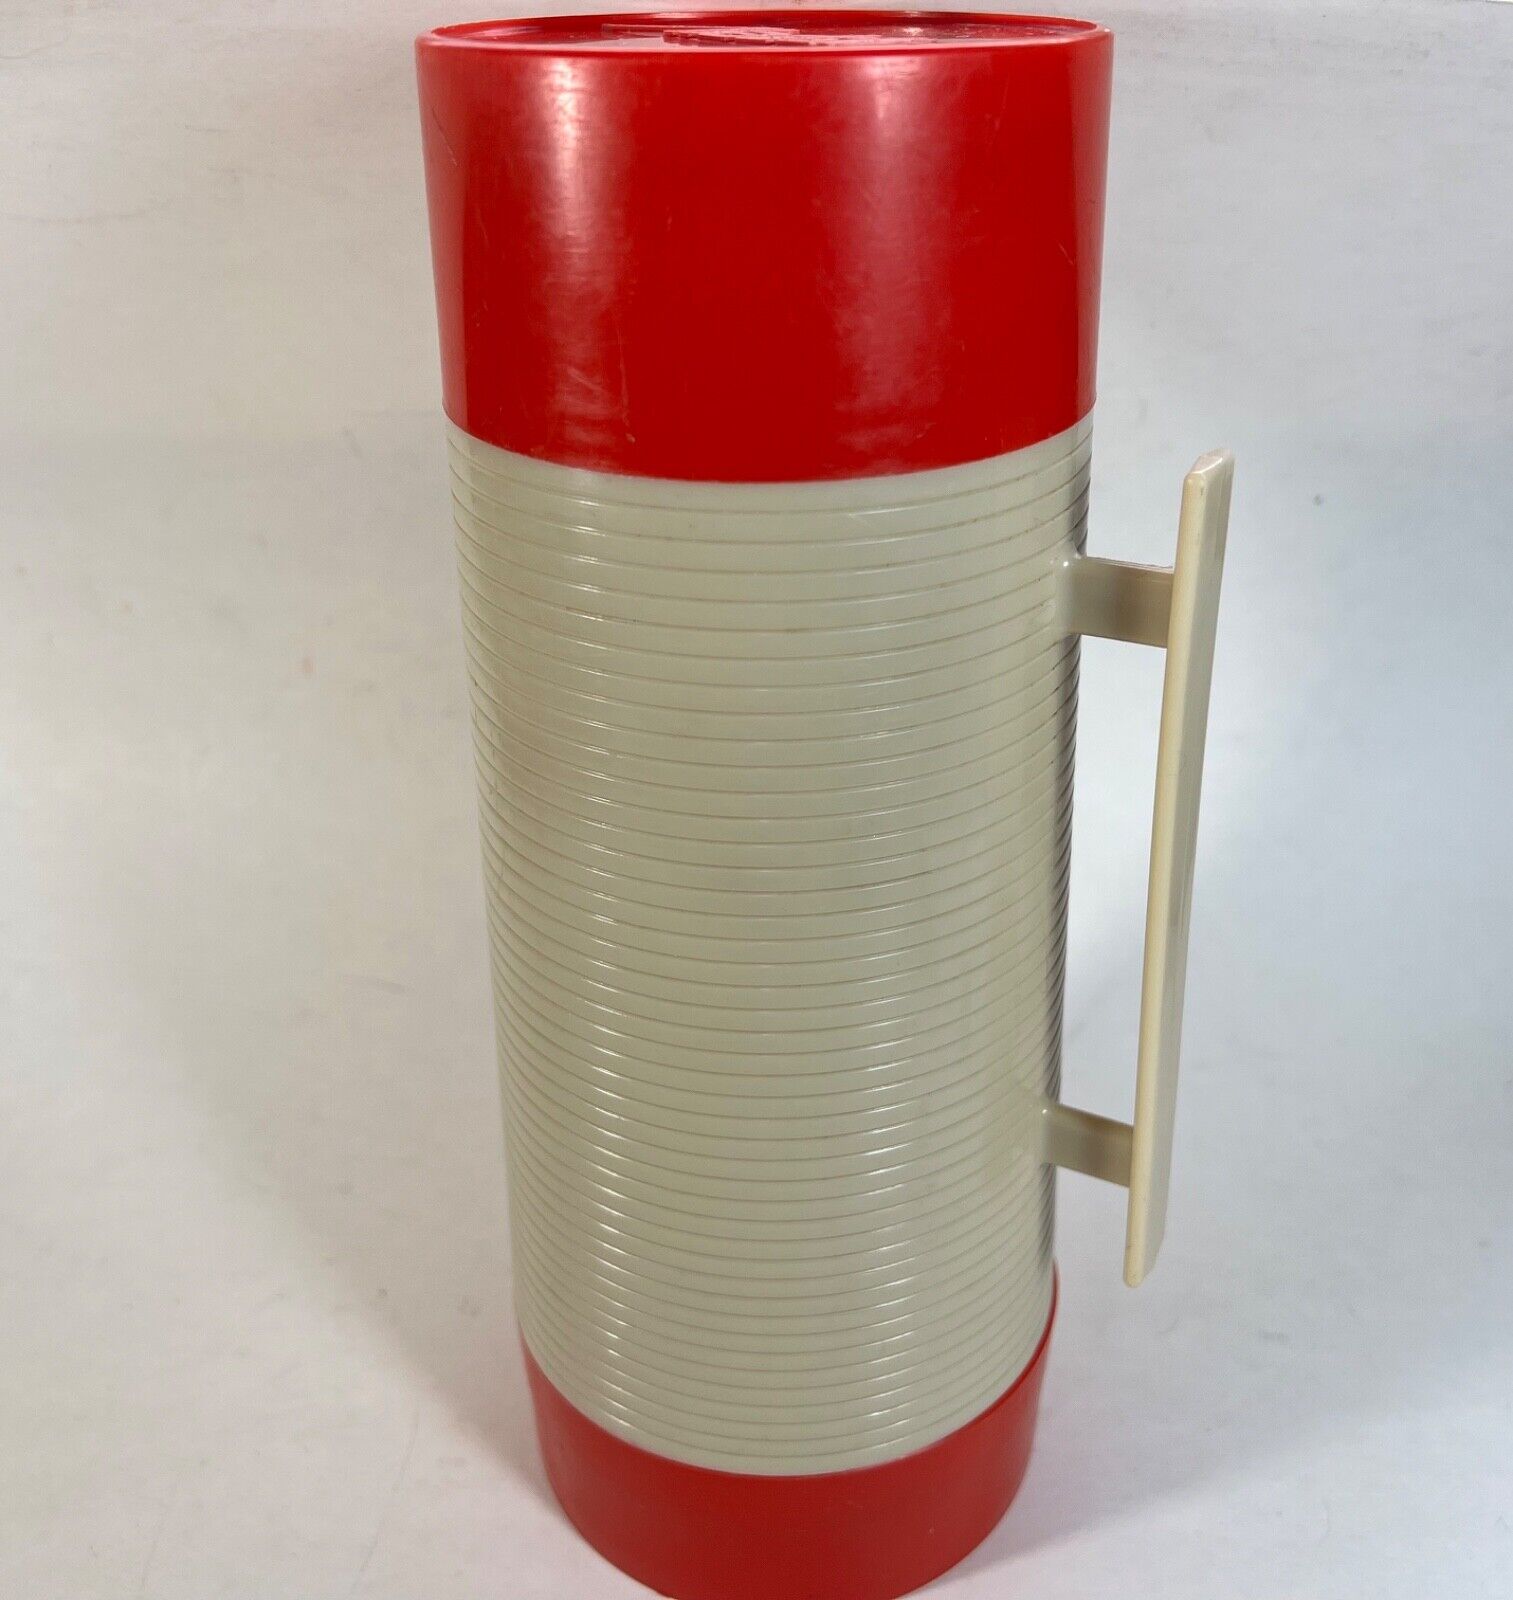 Vintage Aladdin\'s HY-LO Thermos Bottle #WM1060P Wide Mouth - 1 QT - Red/Beige